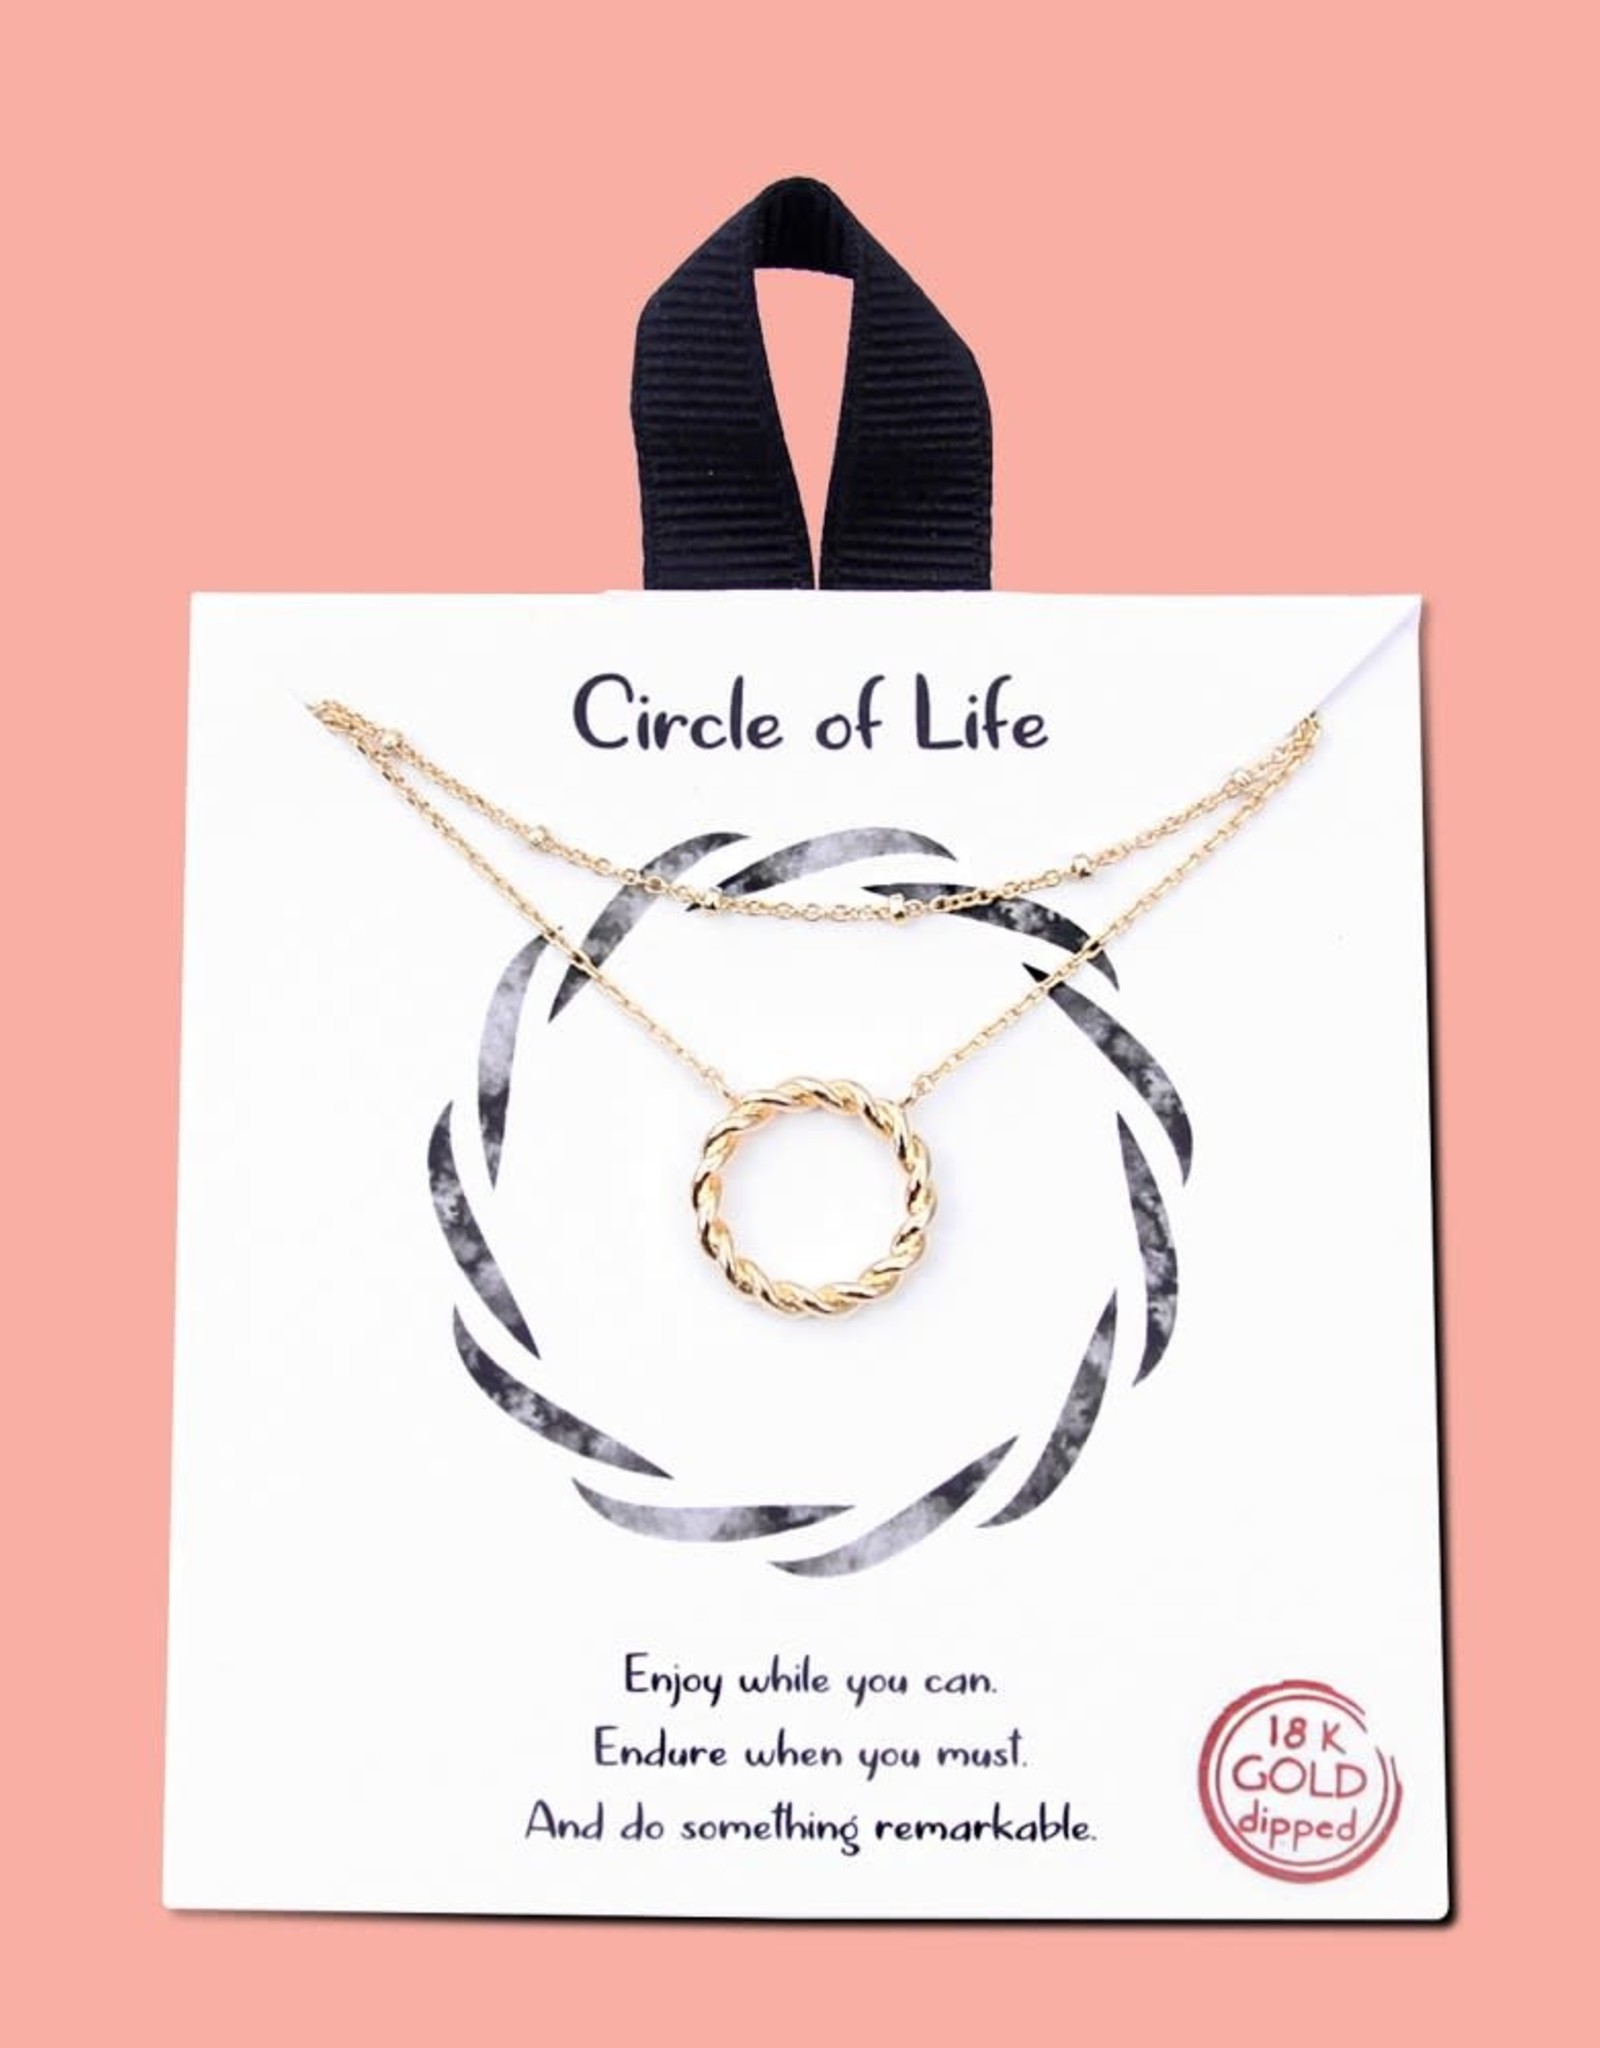 judson 153202 - Gold Dainty Layered Chain Link Necklace Featuring Circle of Life Pendant  - 18k Gold Dipped - Approximately 16" L - Extender 2" L